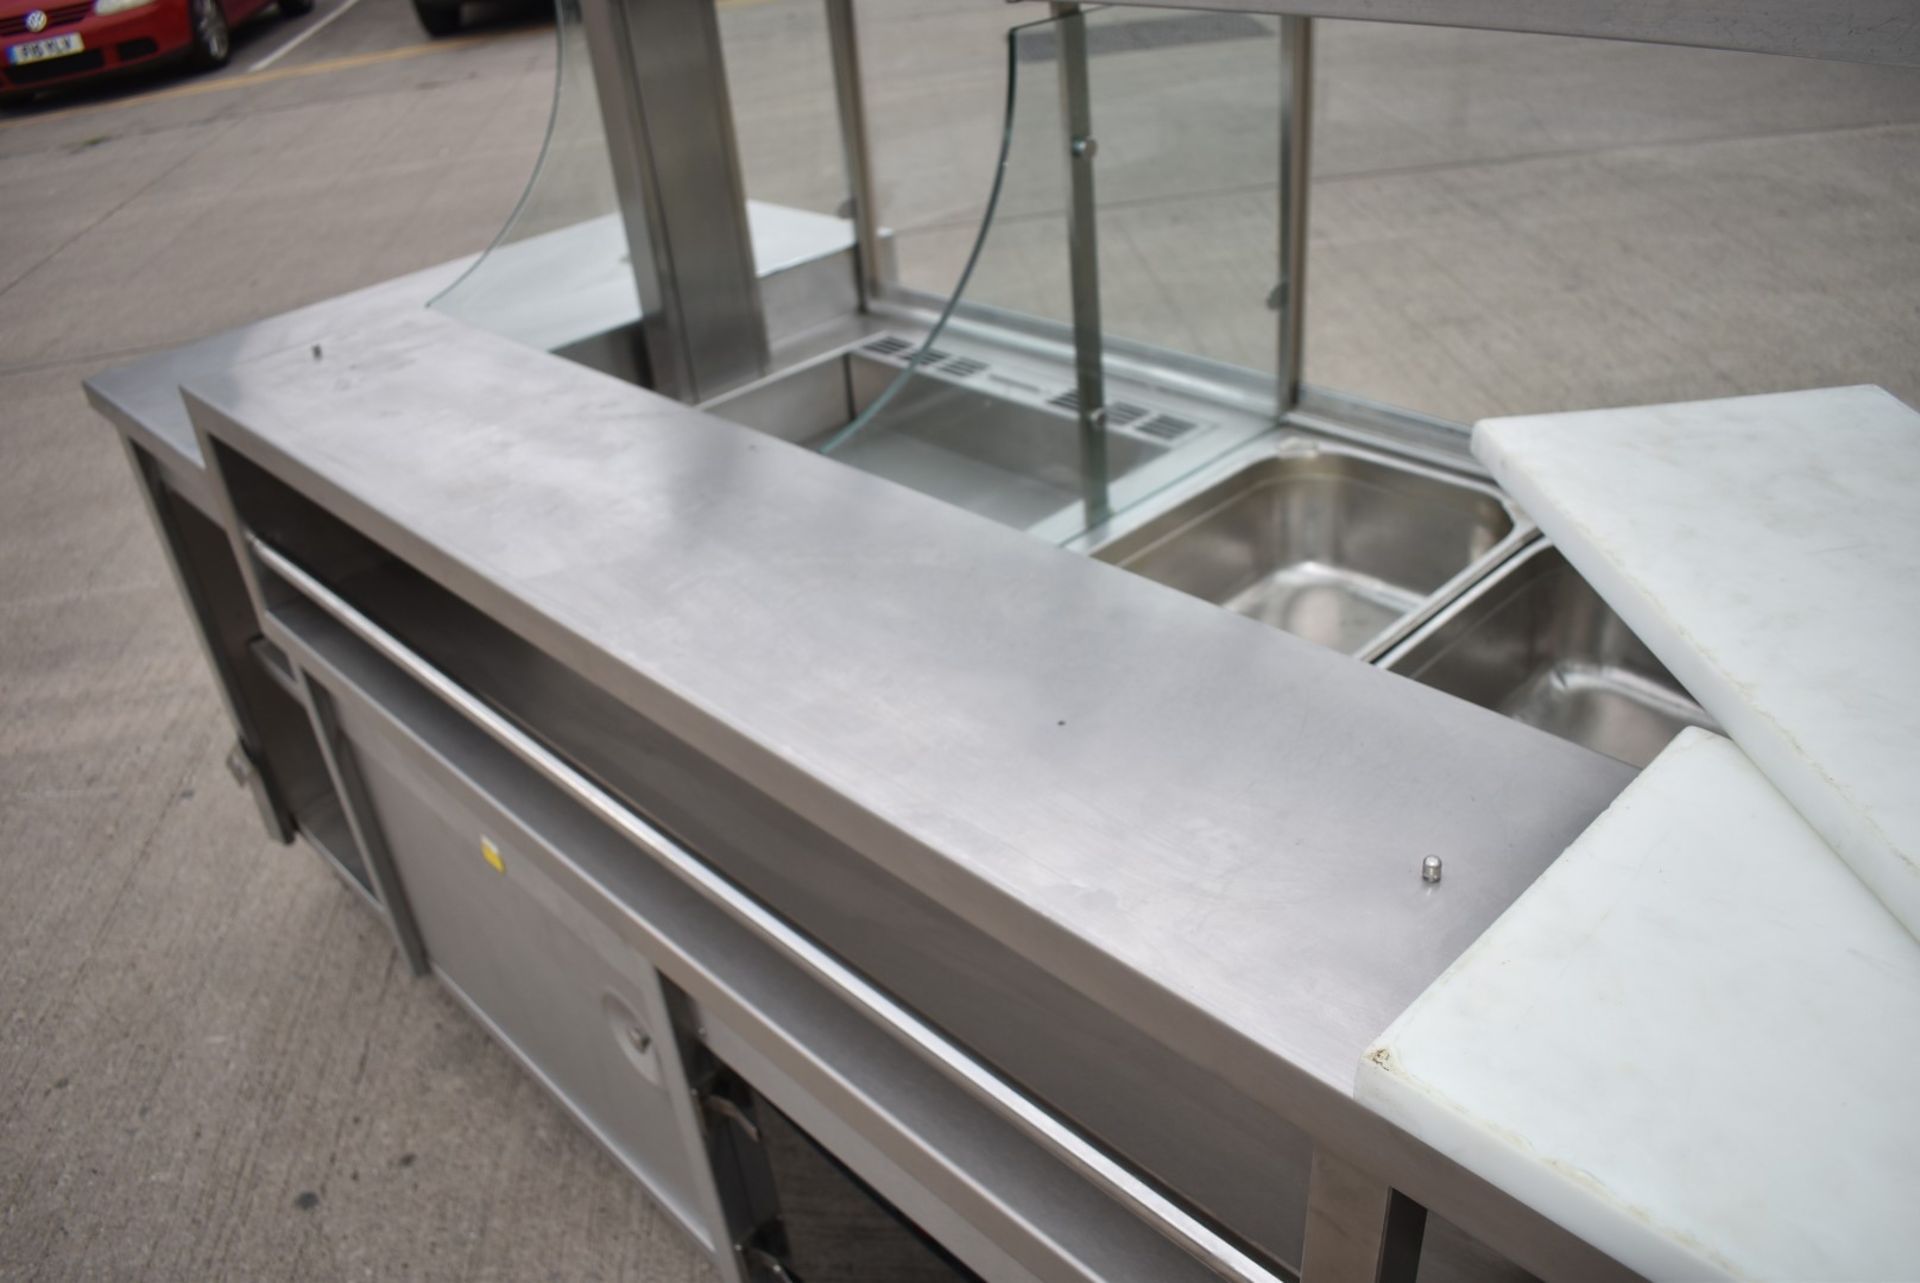 1 x Promart Heated Retail Counter For Take Aways, Hot Food Retail Stores or Canteens etc - - Image 21 of 54